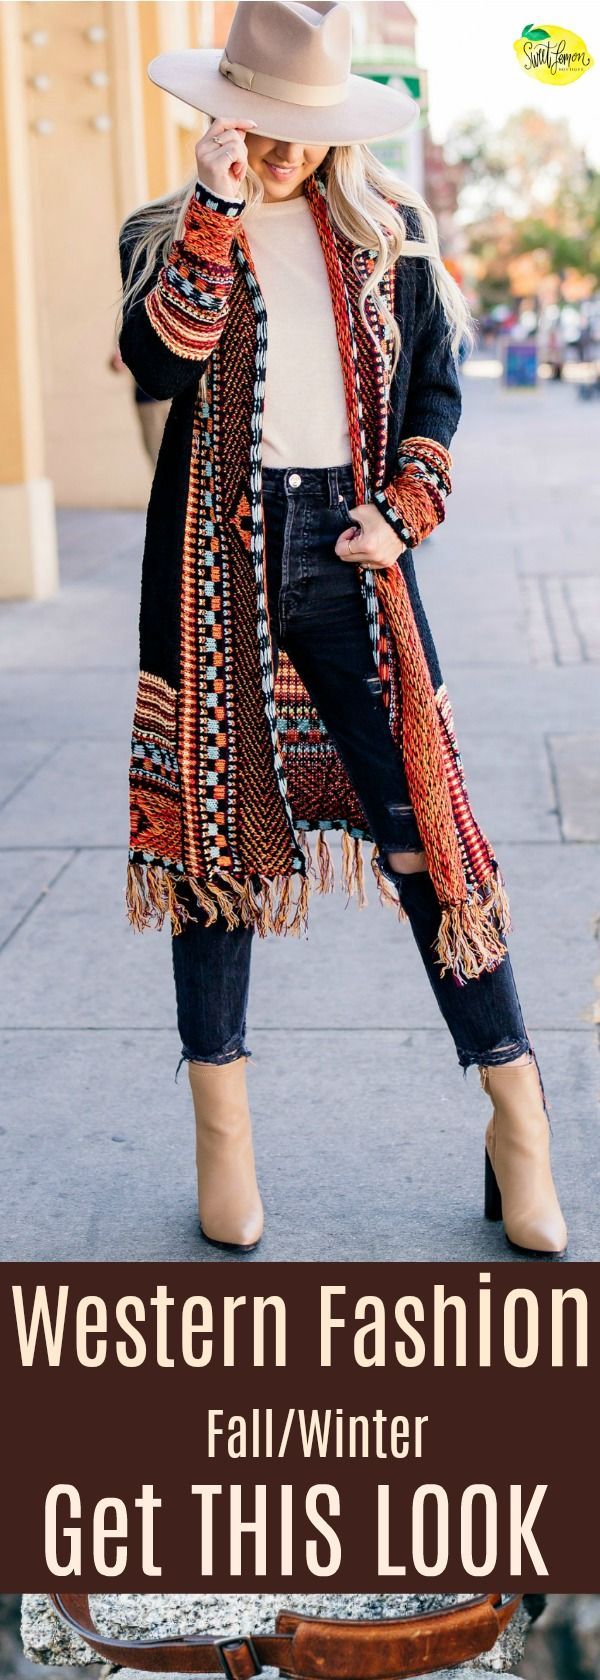 NFR Outfits. Western Fall / Winter Fashion. - NFR Outfits. Western Fall / Winter Fashion. -   19 boho style Fall ideas